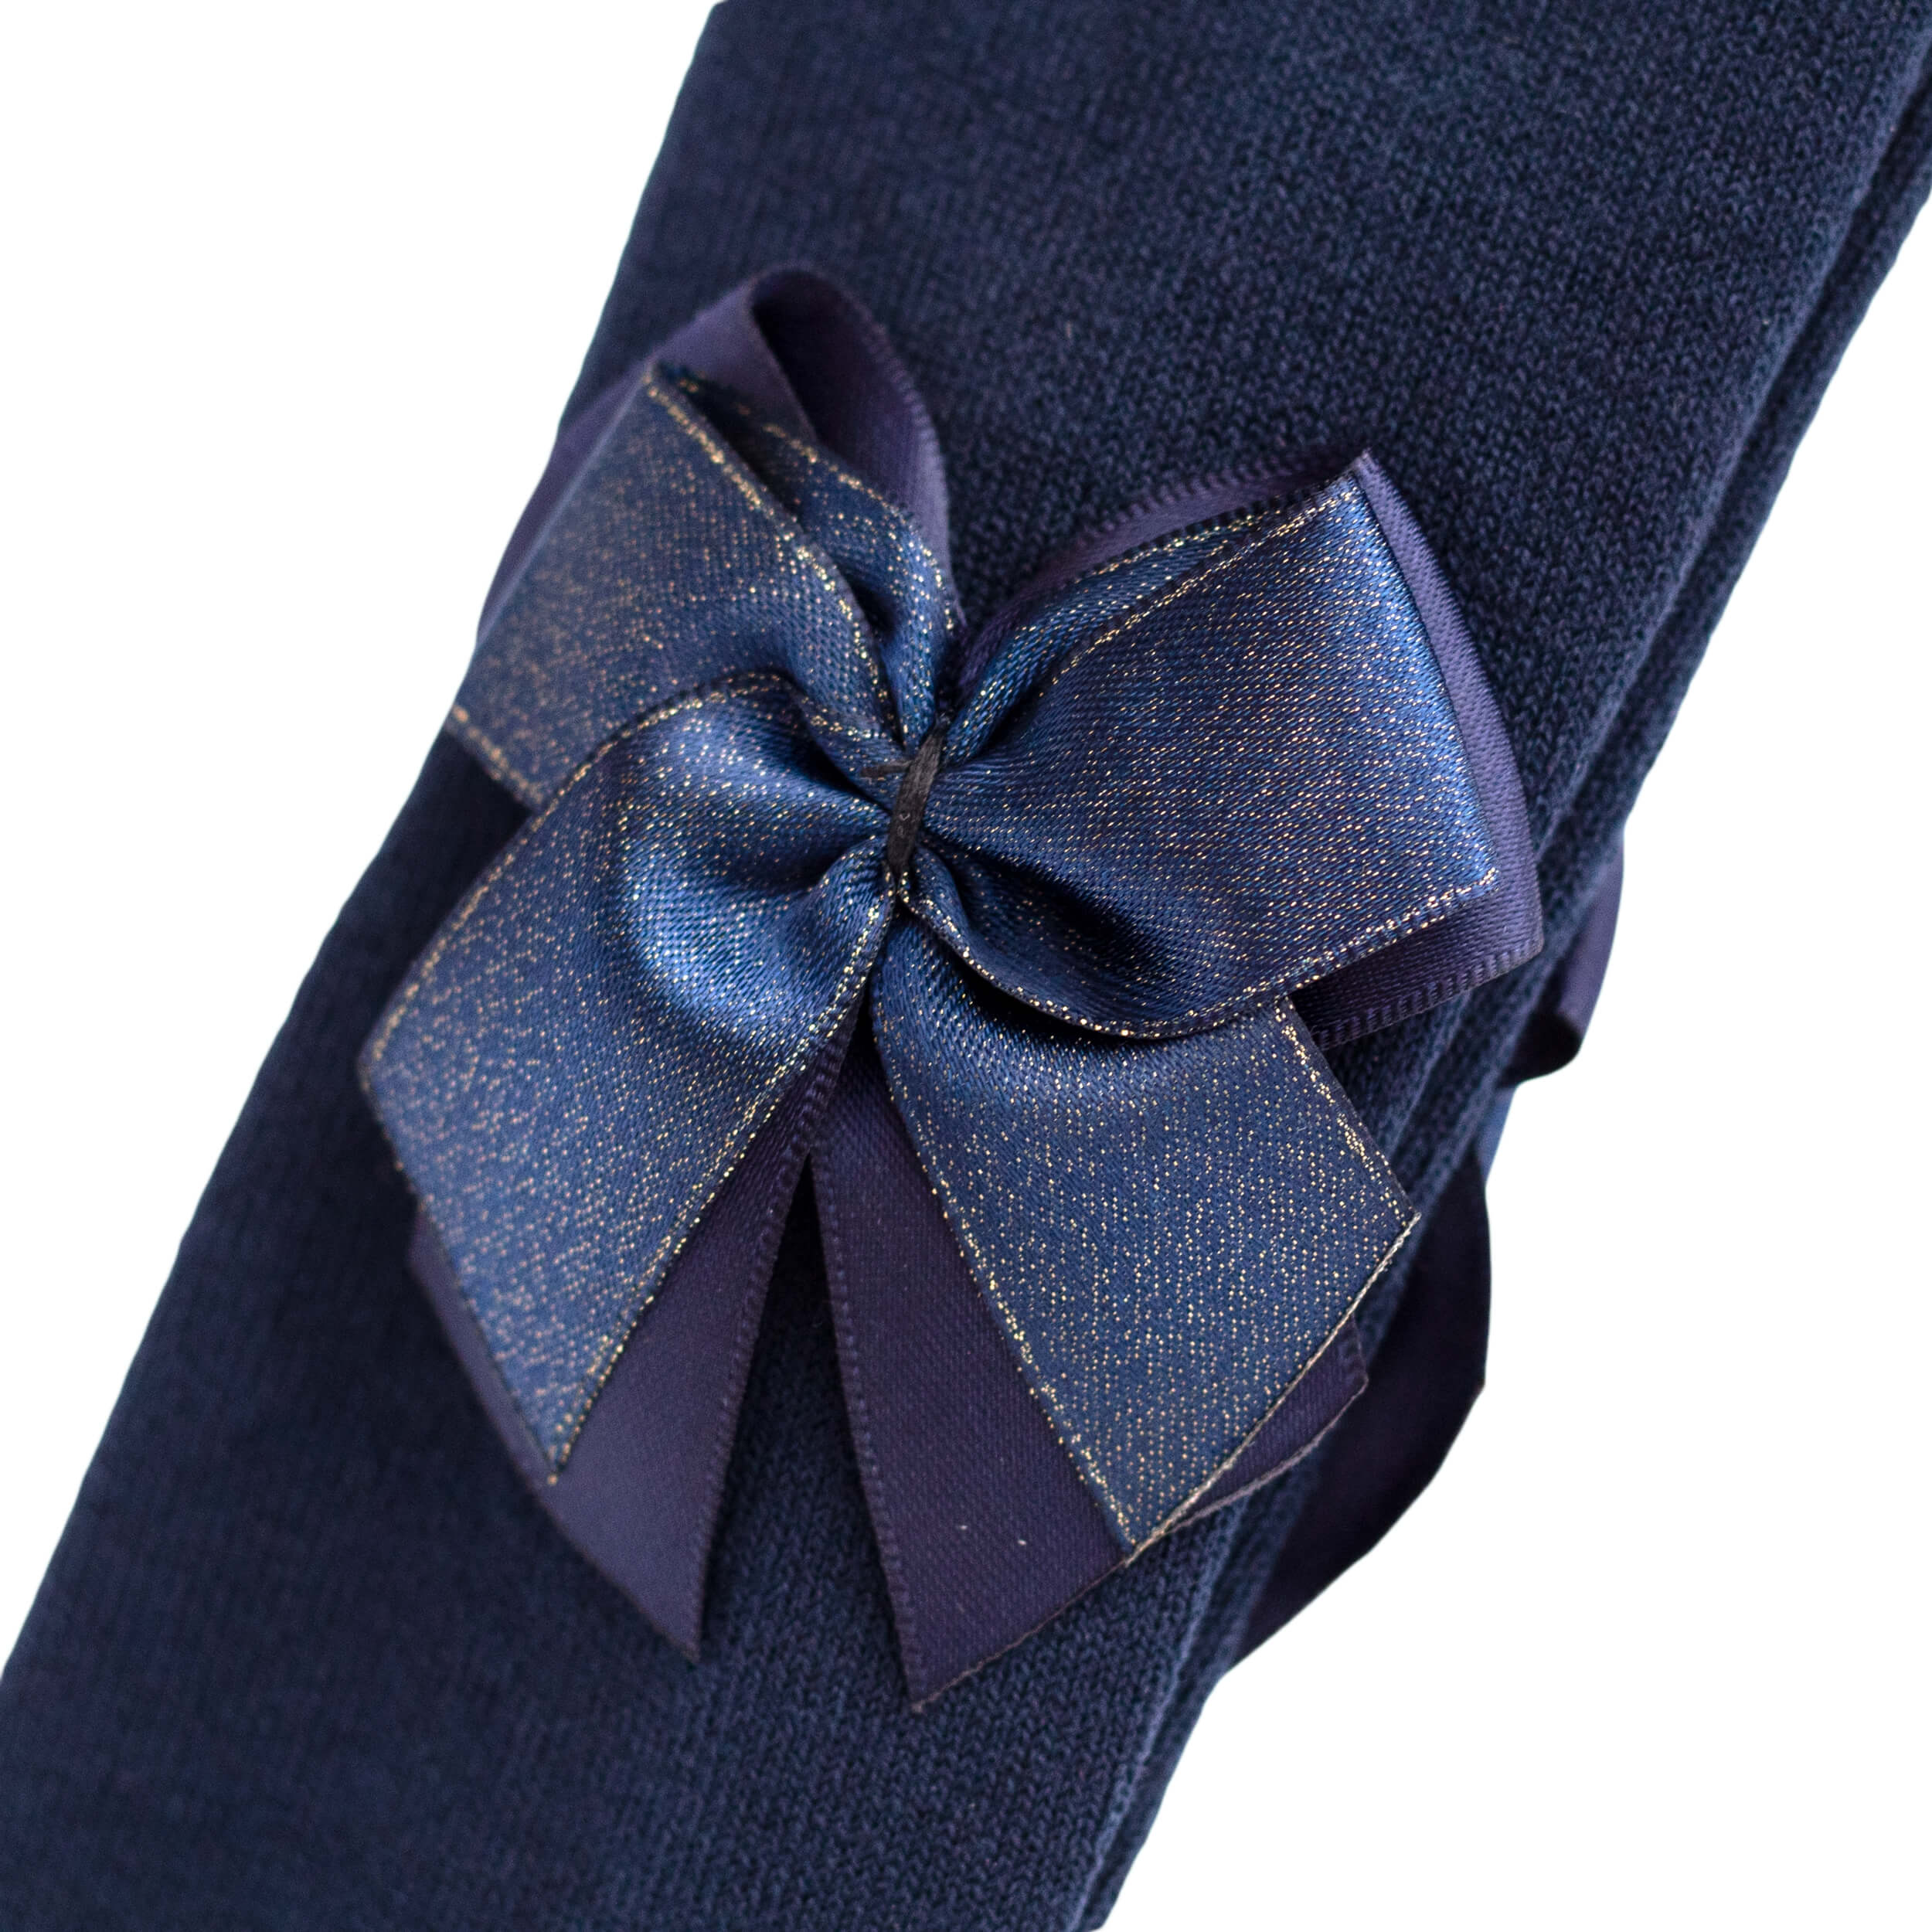 spanish baby tights with double bow in navy